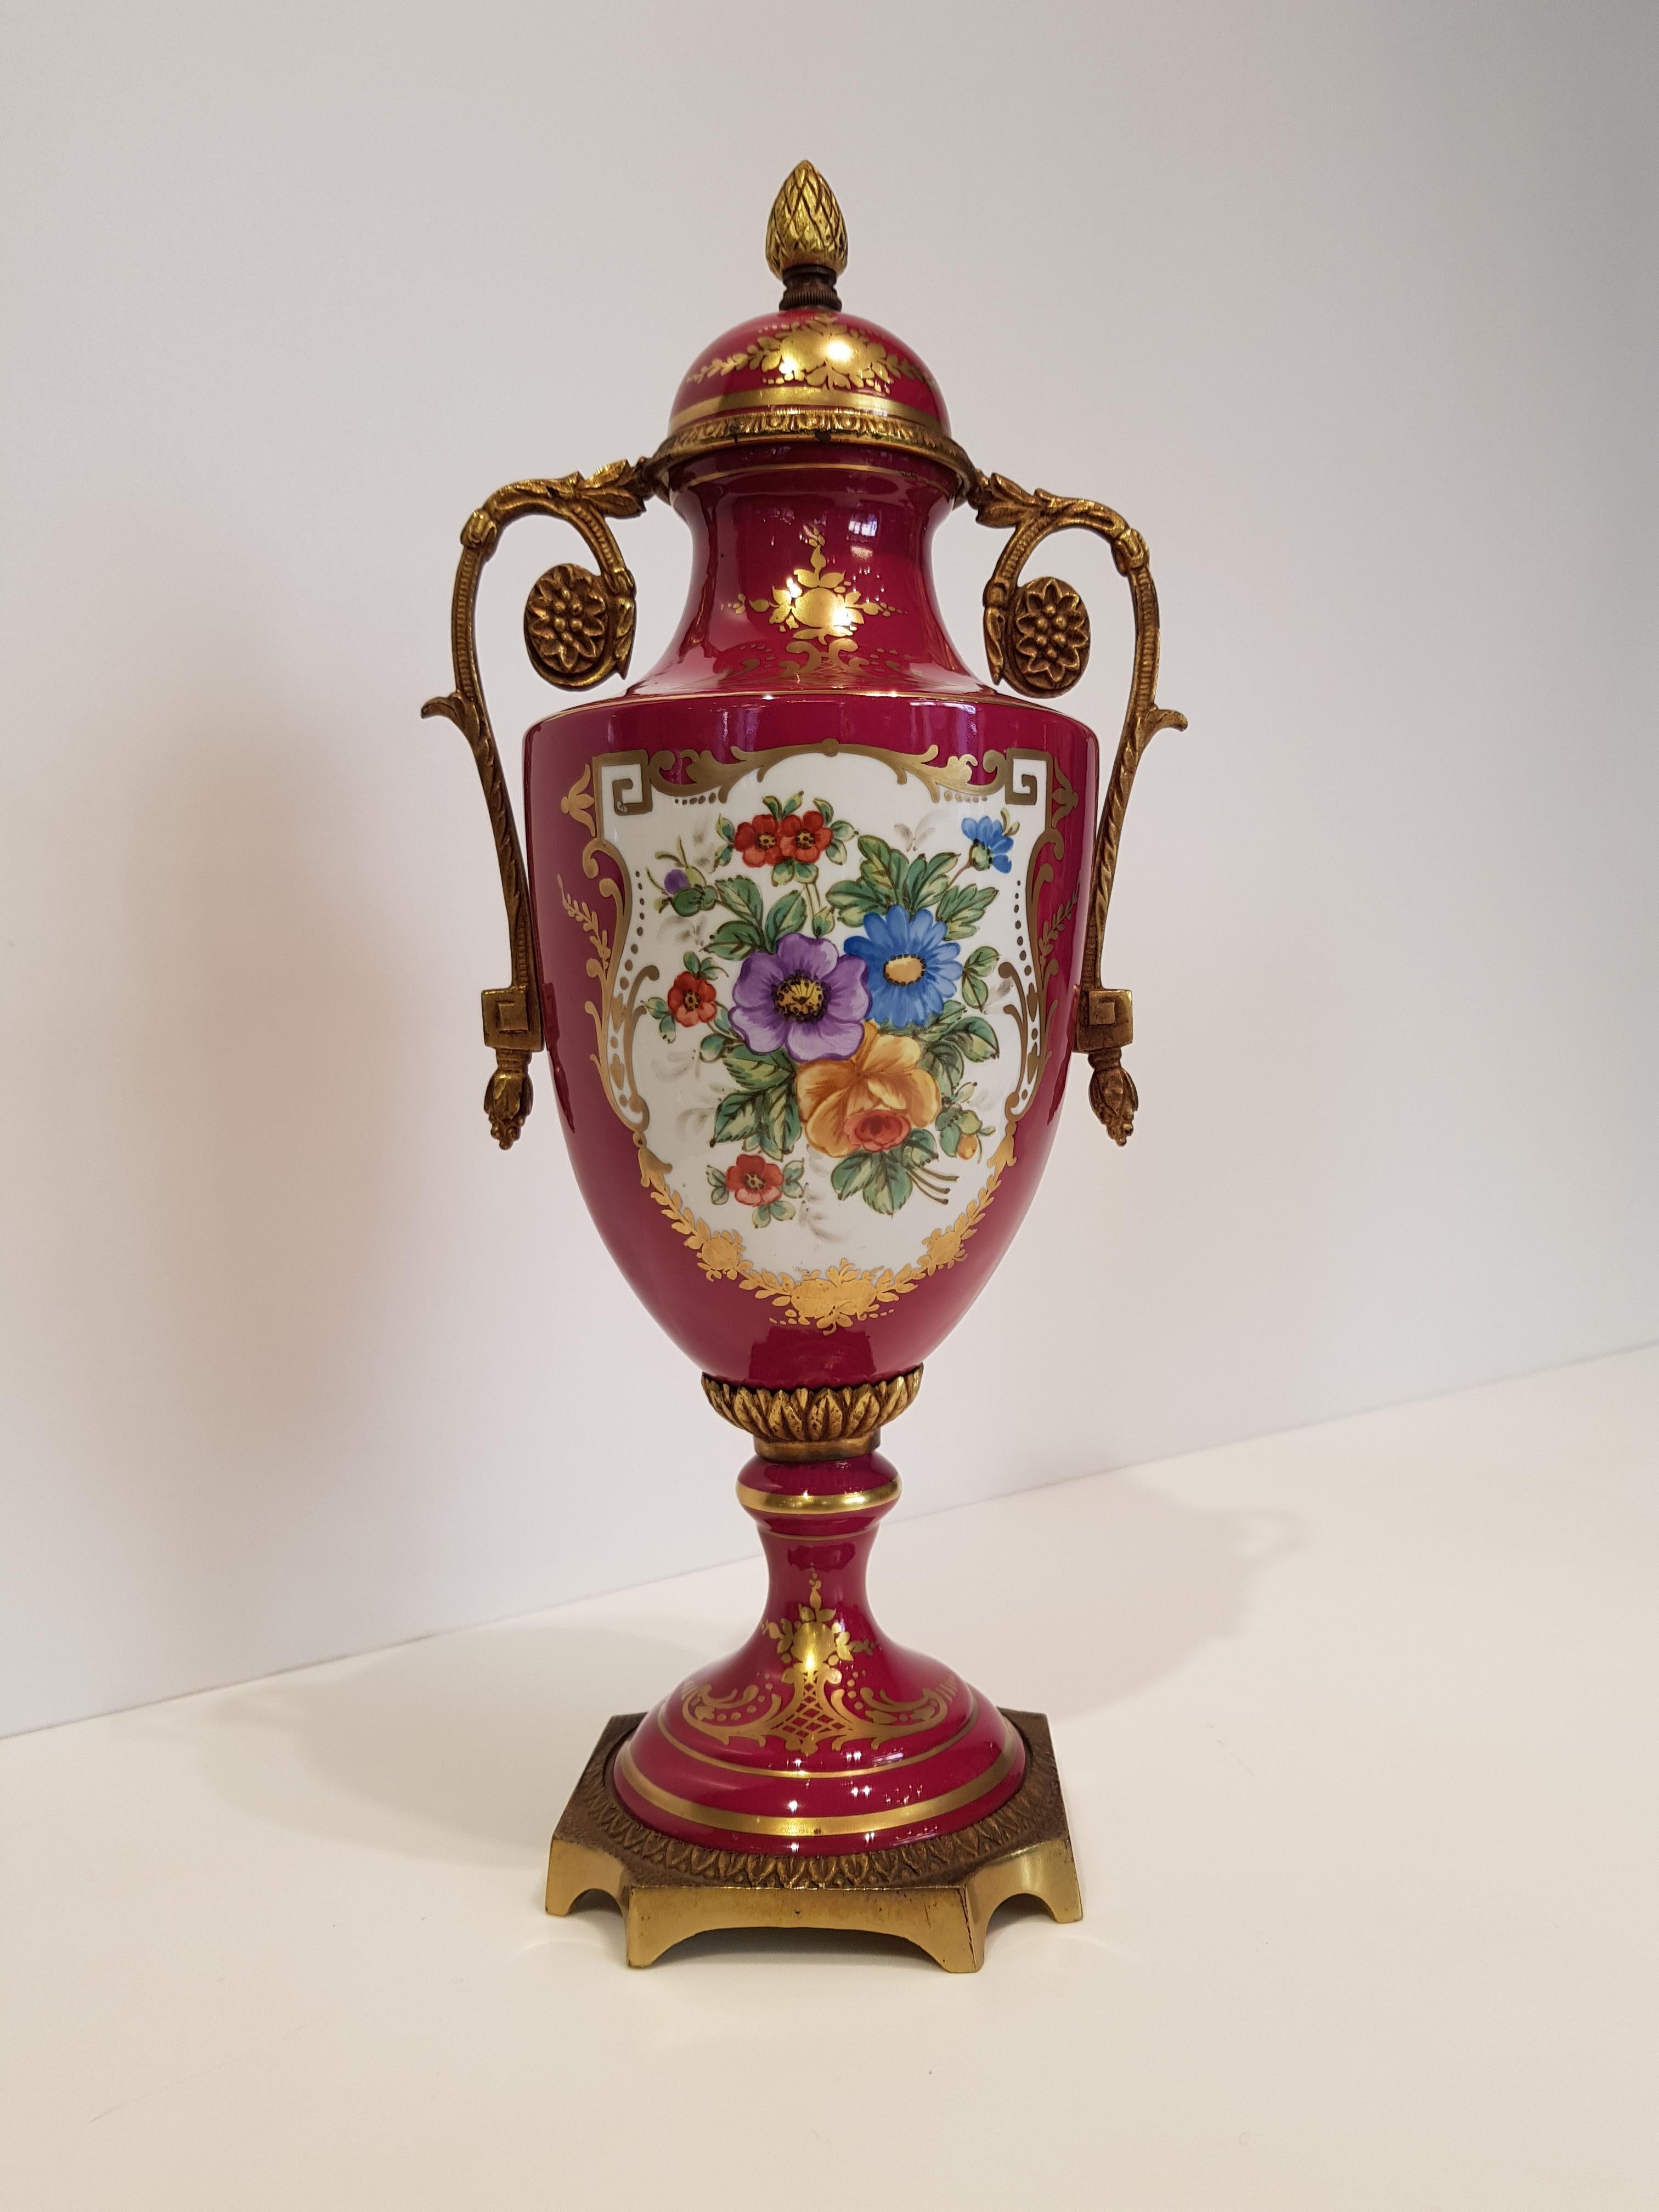 Ancient set of two-handled French ceramic vases crafted and hand decorated in the 19th century.
The vases are characterized by a purpura and gold bottom, with florar polychrome pattern with a fix lid decorated with a pinecone. The base is in golden